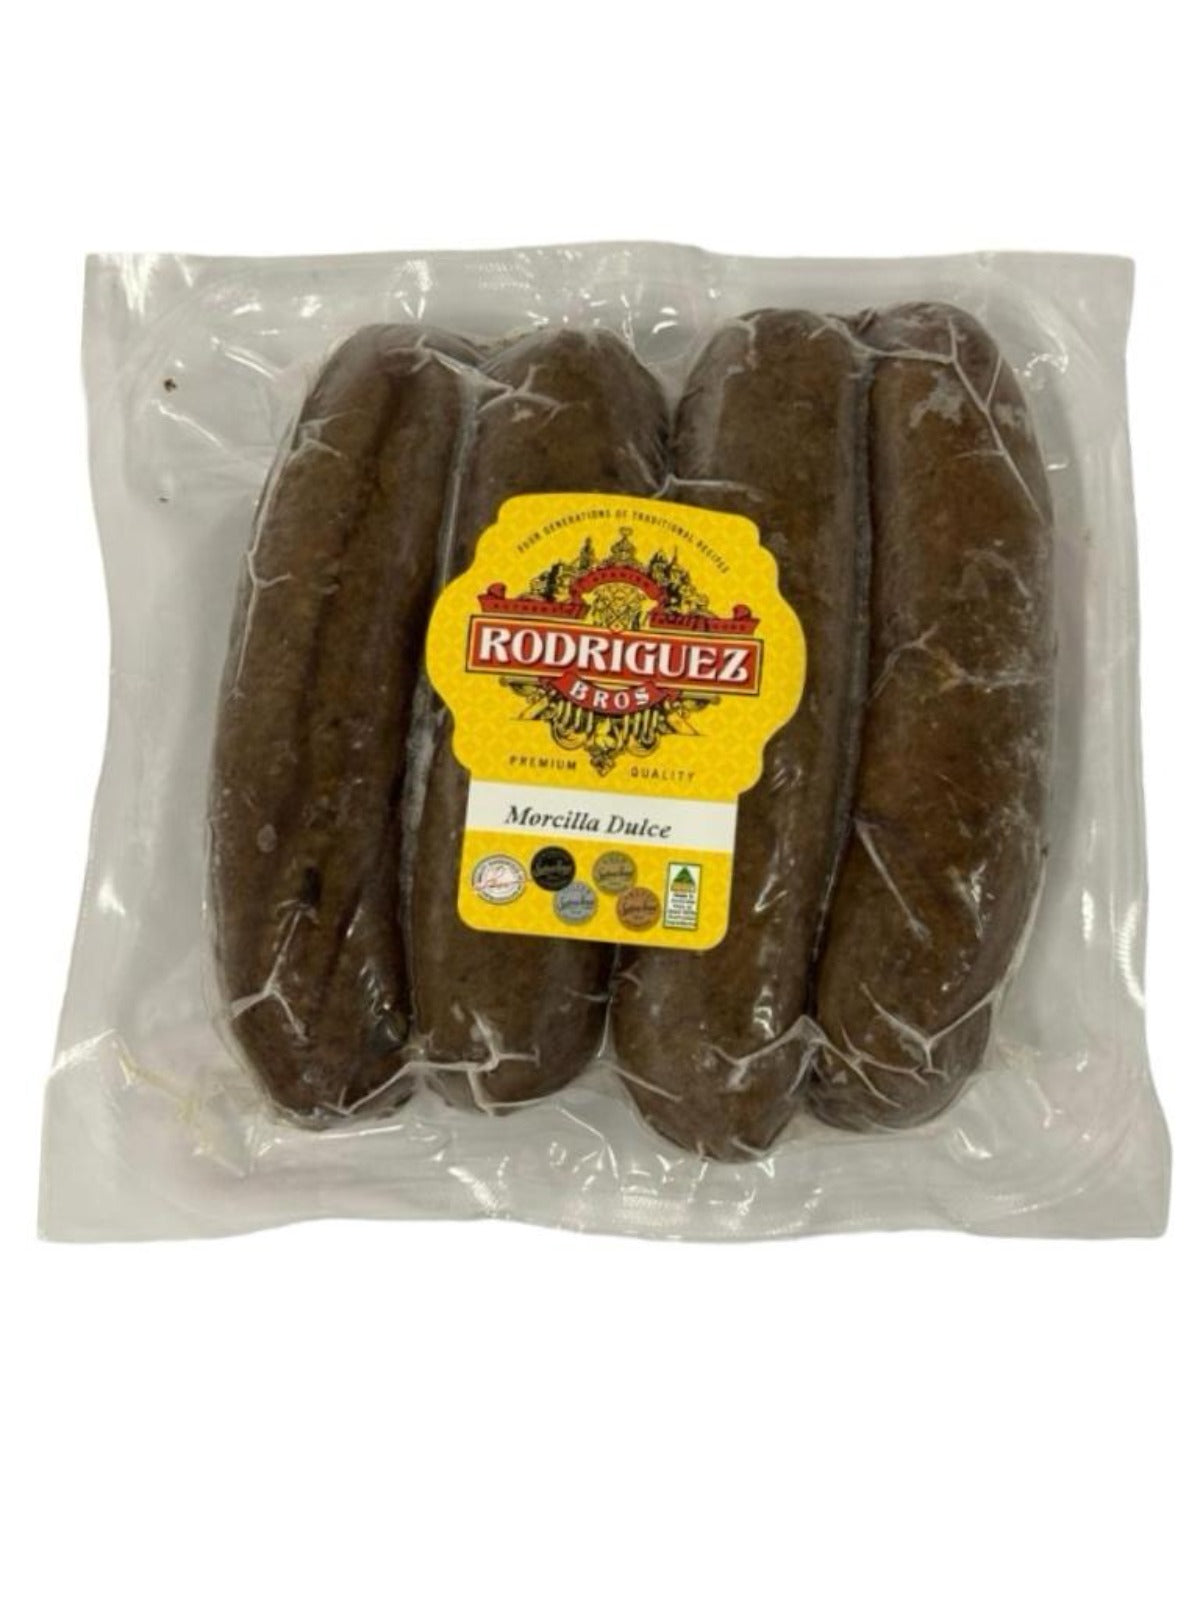 FROZEN AVAILABLE IN STORE ONLY - Morcilla Dulce (Sweet) 4 piece pack frozen